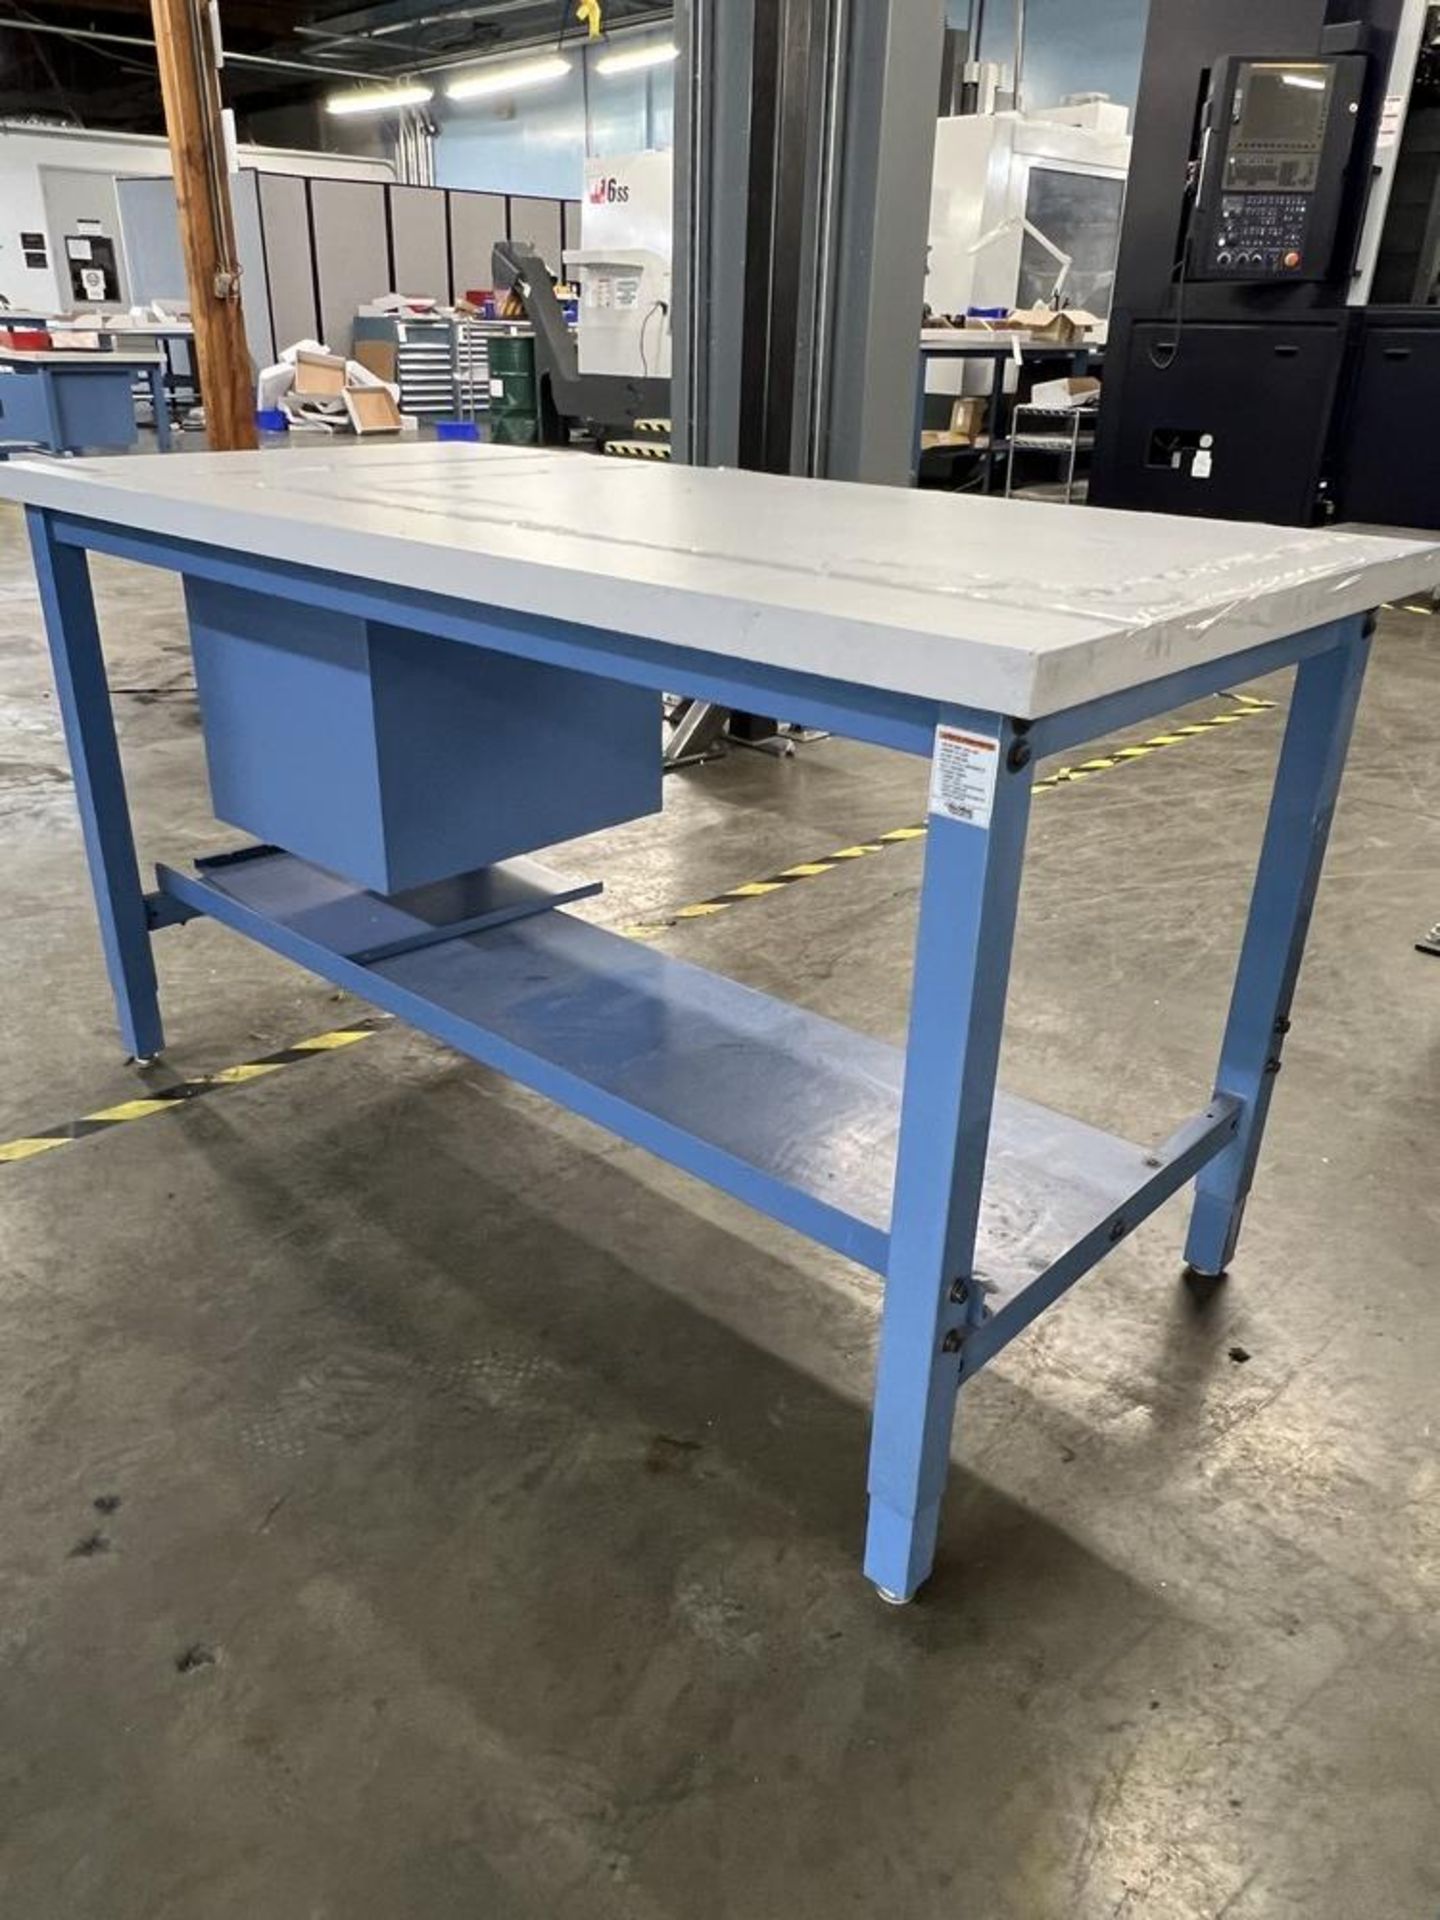 2 Tier Global Industrial Adjustable Work Table with Cabinet - Image 4 of 4